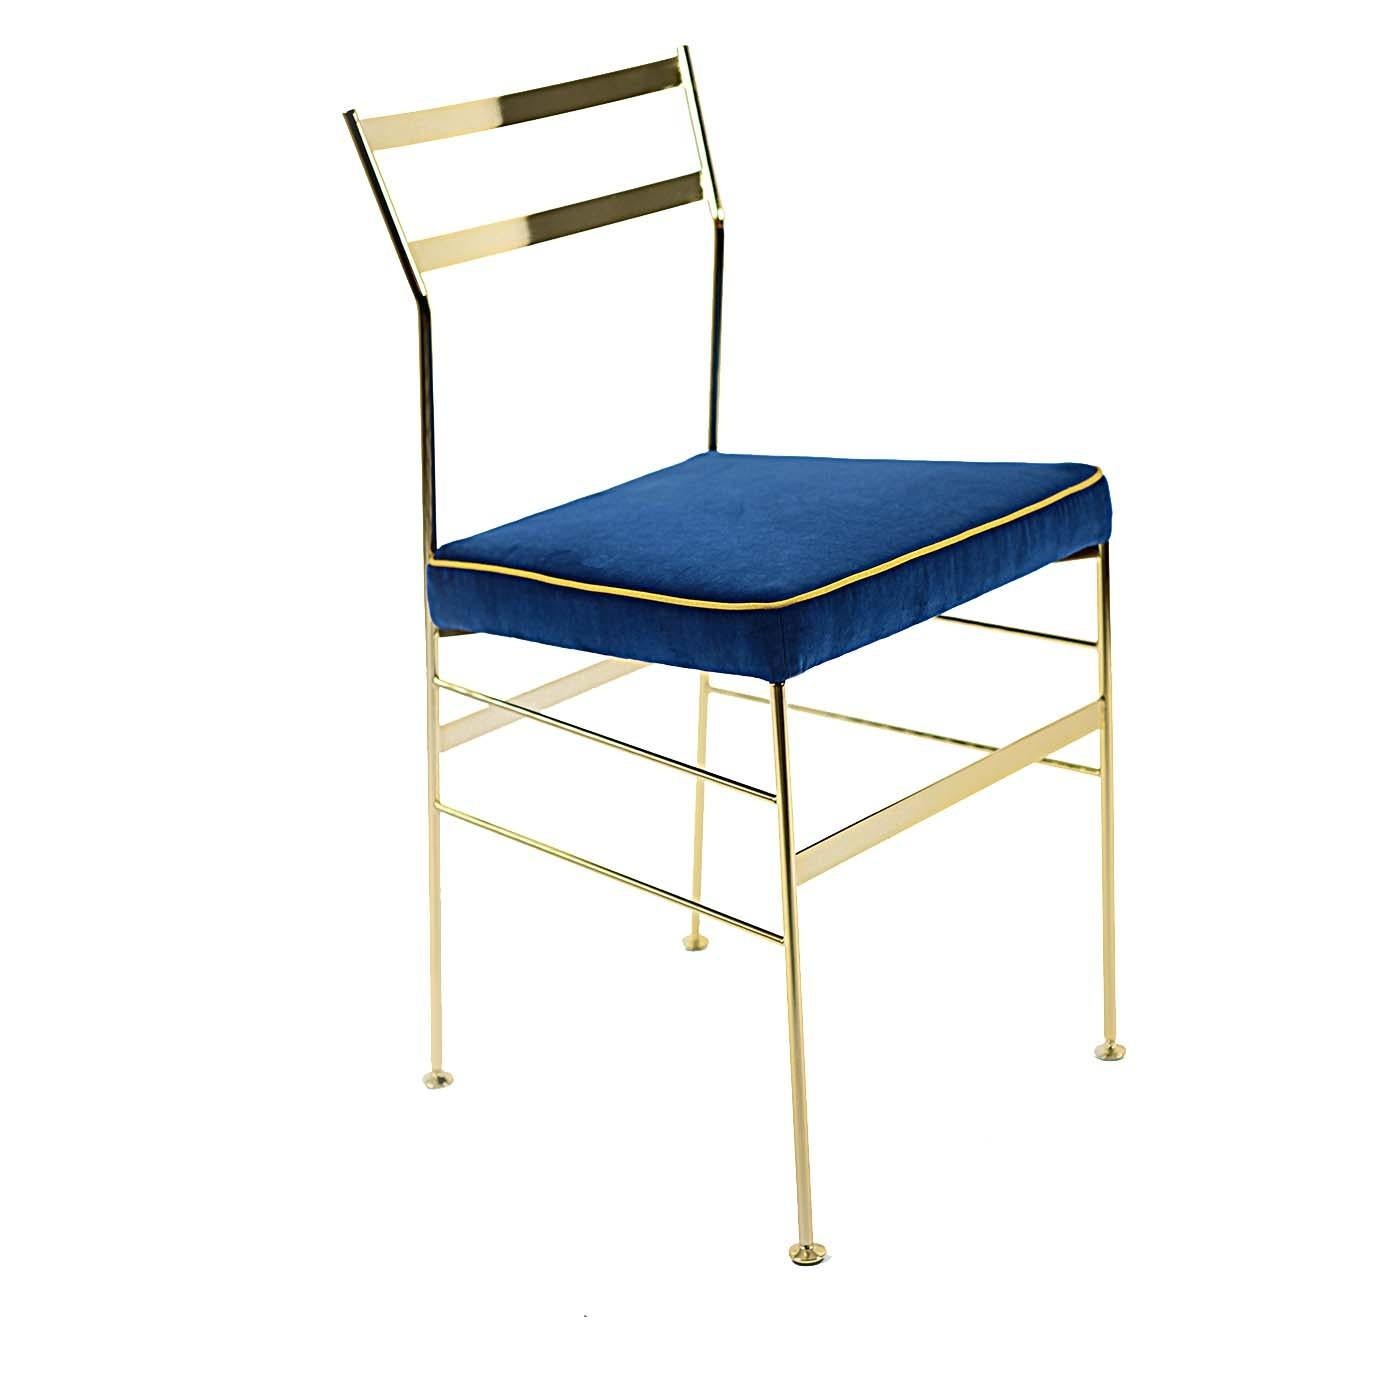 Italian Pontina Gold and Blue Chair by Sotow